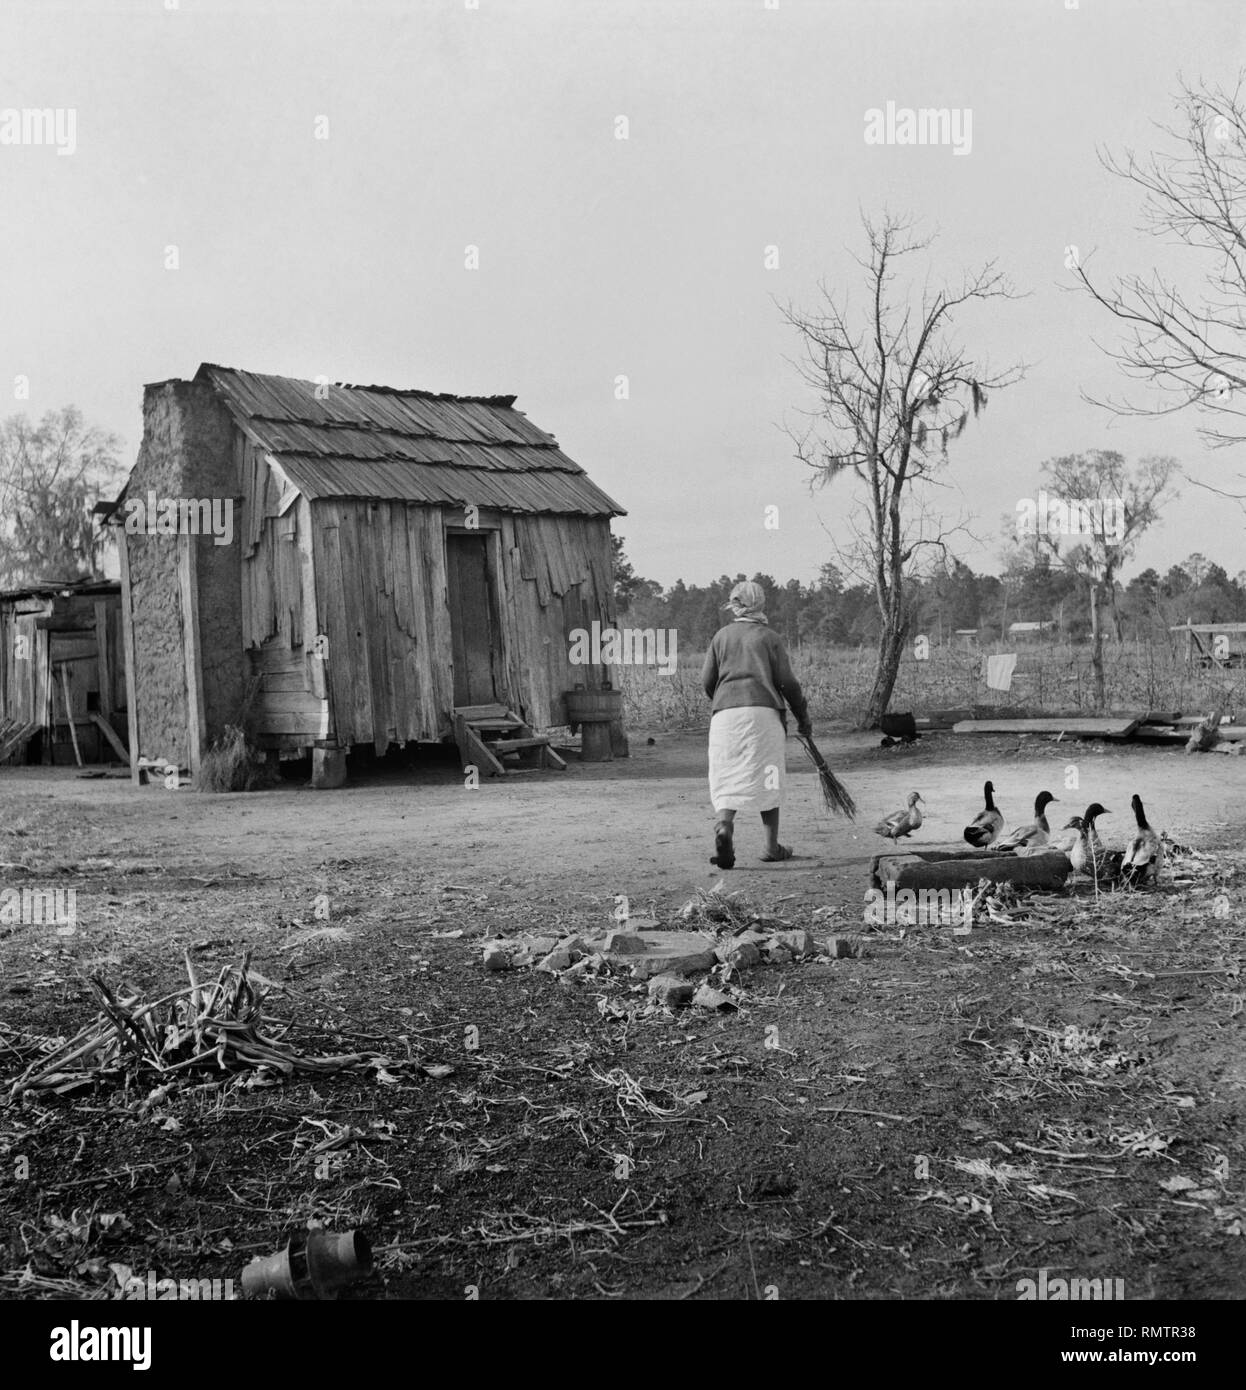 Woman Walking in Yard by Rural Cabin, near Beaufort, South Carolina, USA, Marion Post Wolcott, Farm Security Administration, December 1938 Stock Photo